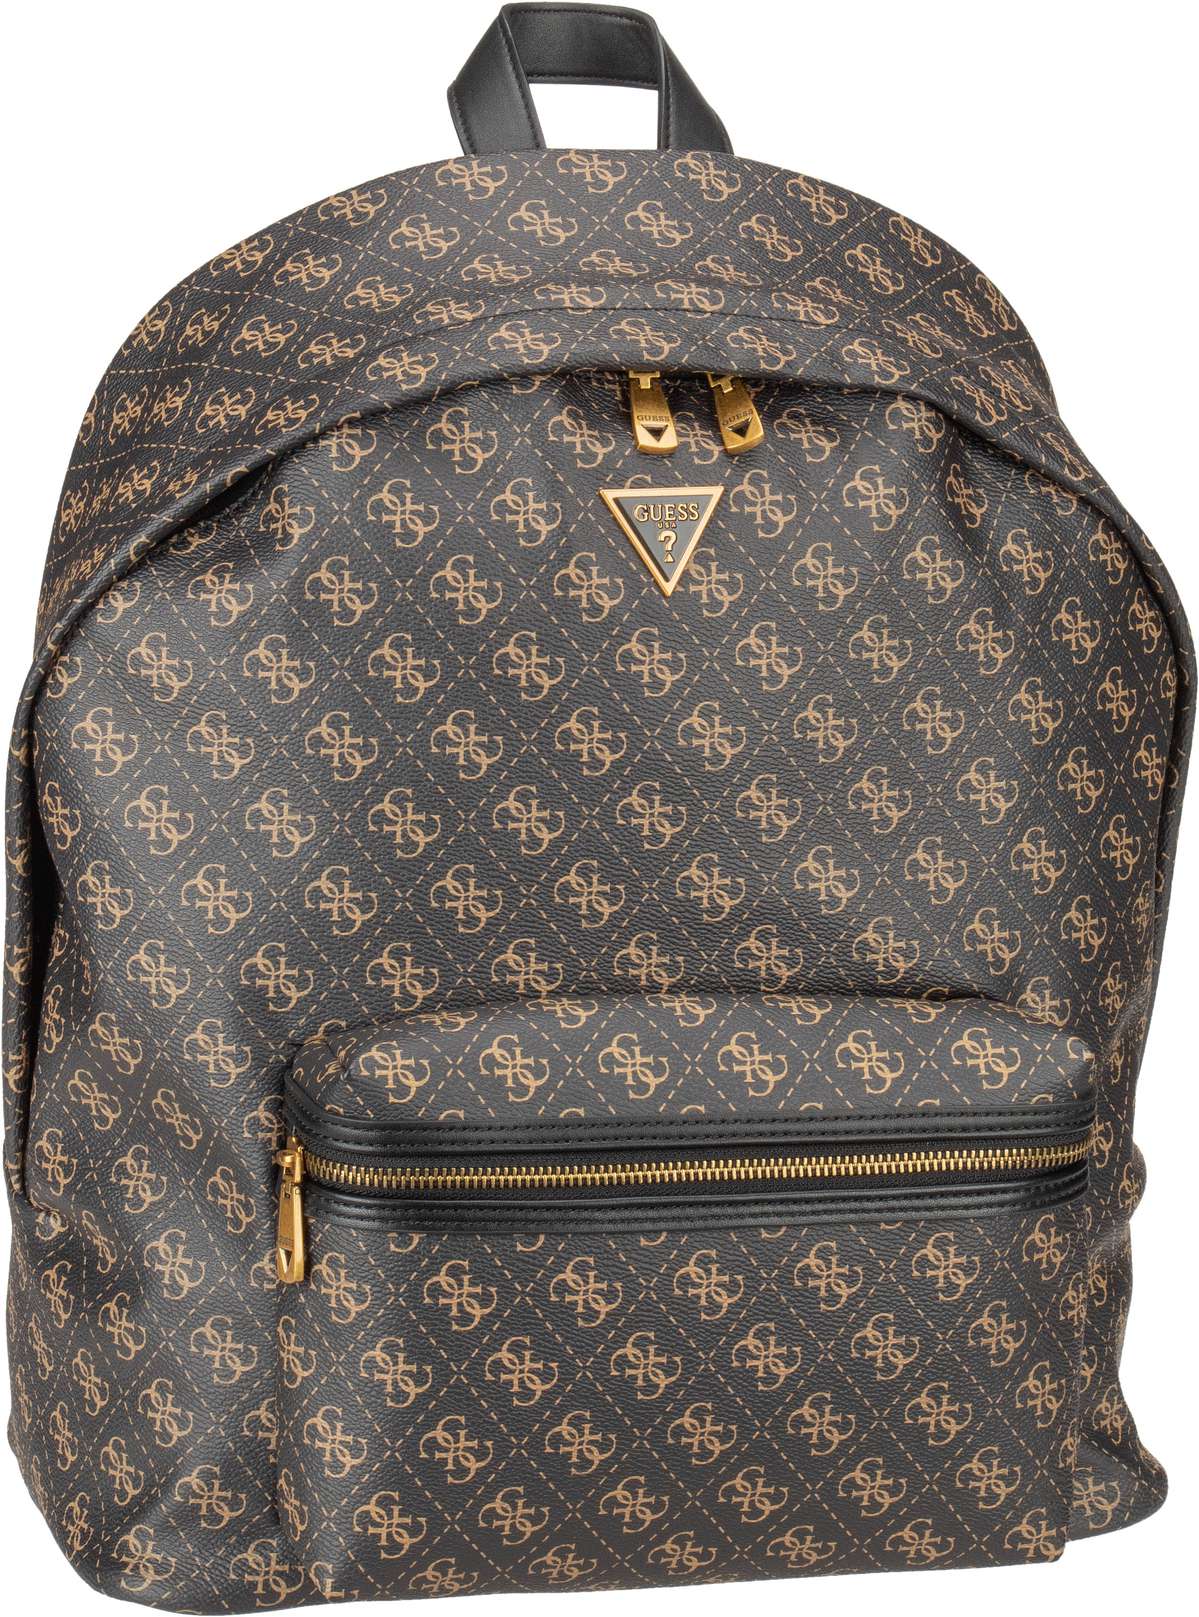 Guess Vezzola Compact Backpack - Brown Ochre